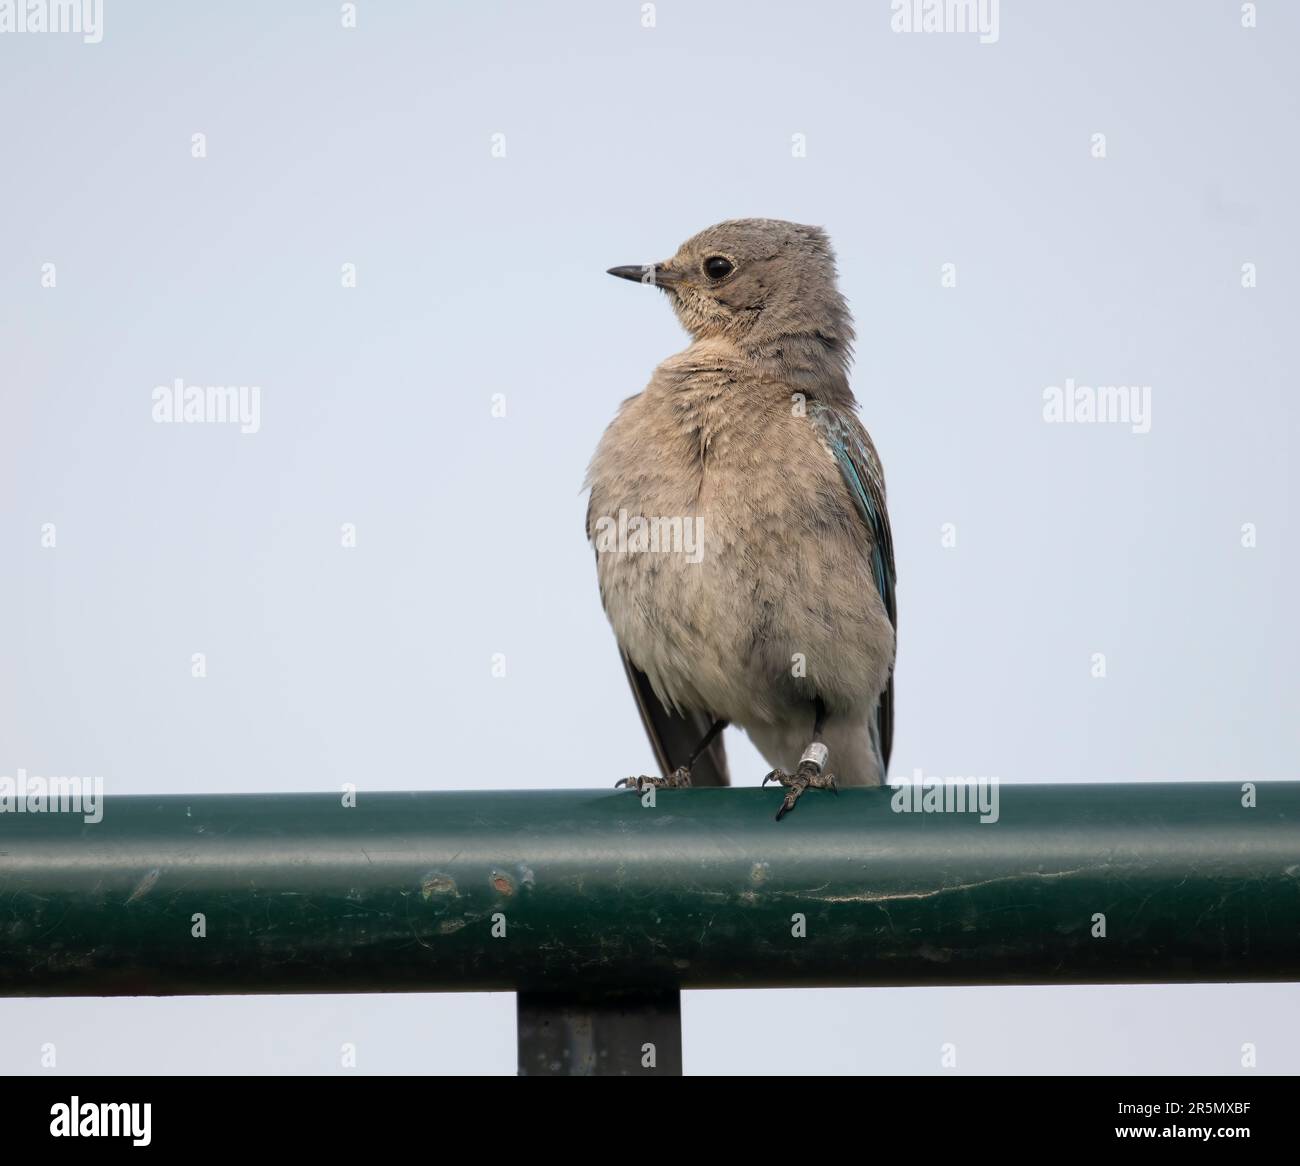 Female Mountain bluebird (Sialia currucoides) perched on a fence, South of Highway 22x, Calgary,  Alberta, Canada, Stock Photo